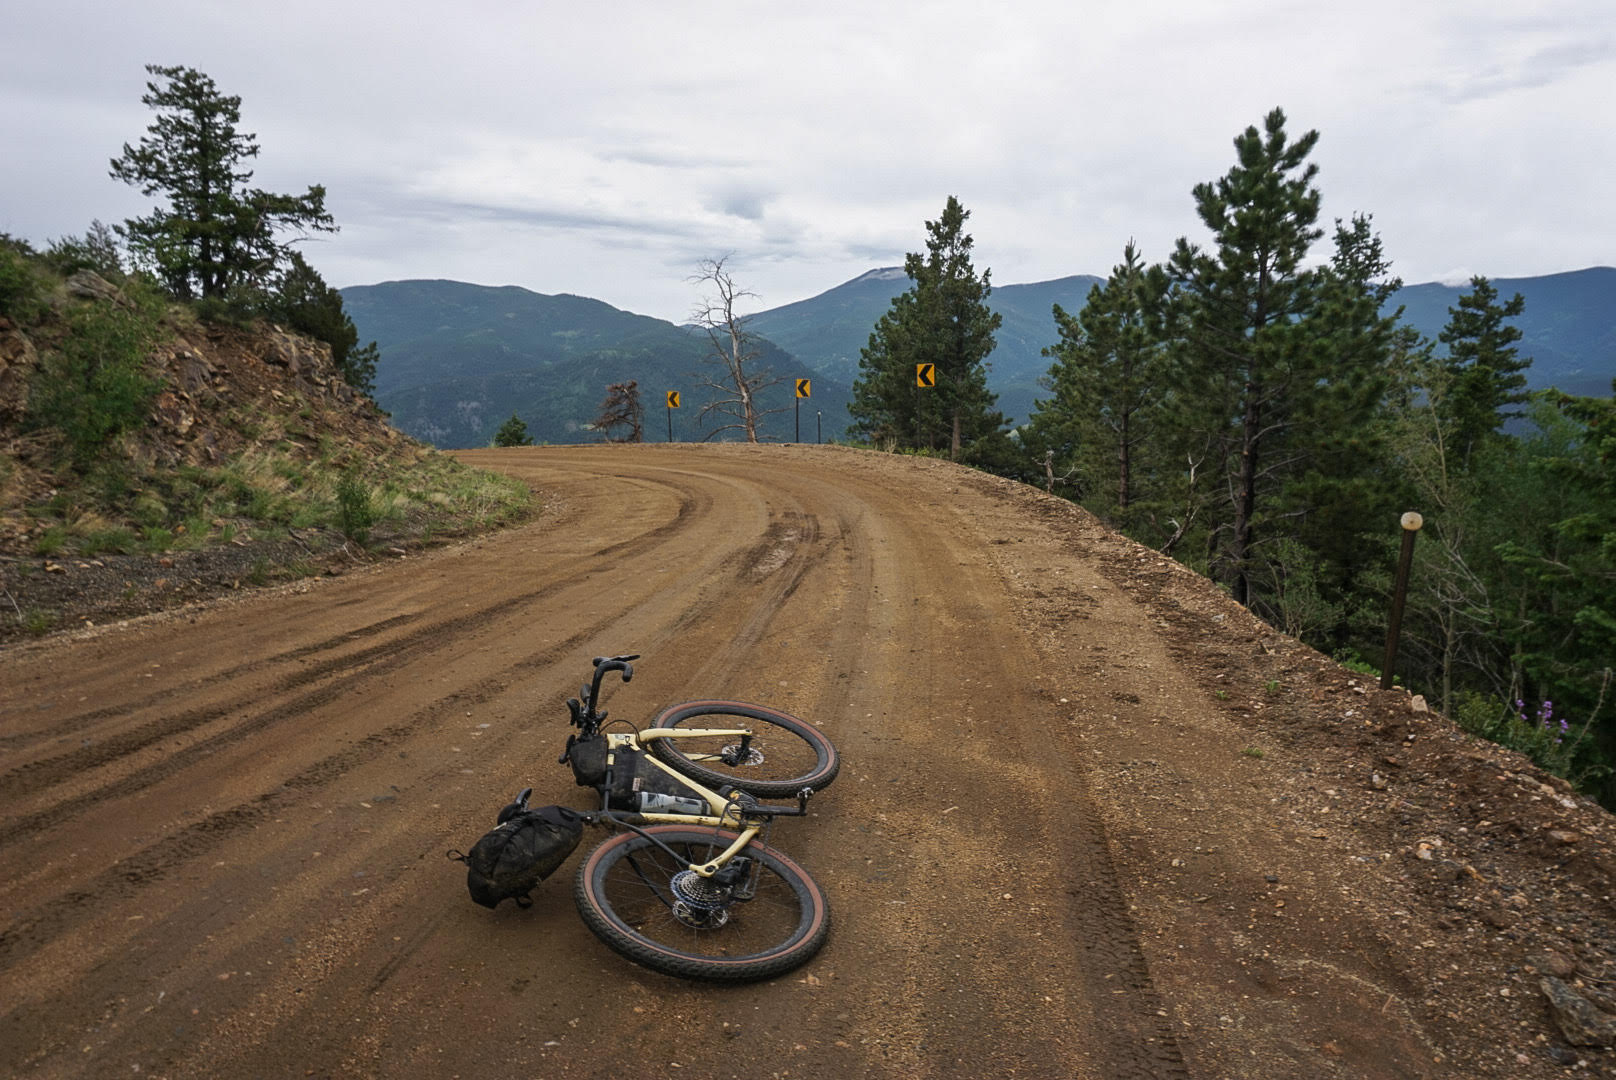 Andrew Onermaa reflects on winning the North South Colorado 2022 bikepacking race on his Otso Cycles Waheela C.